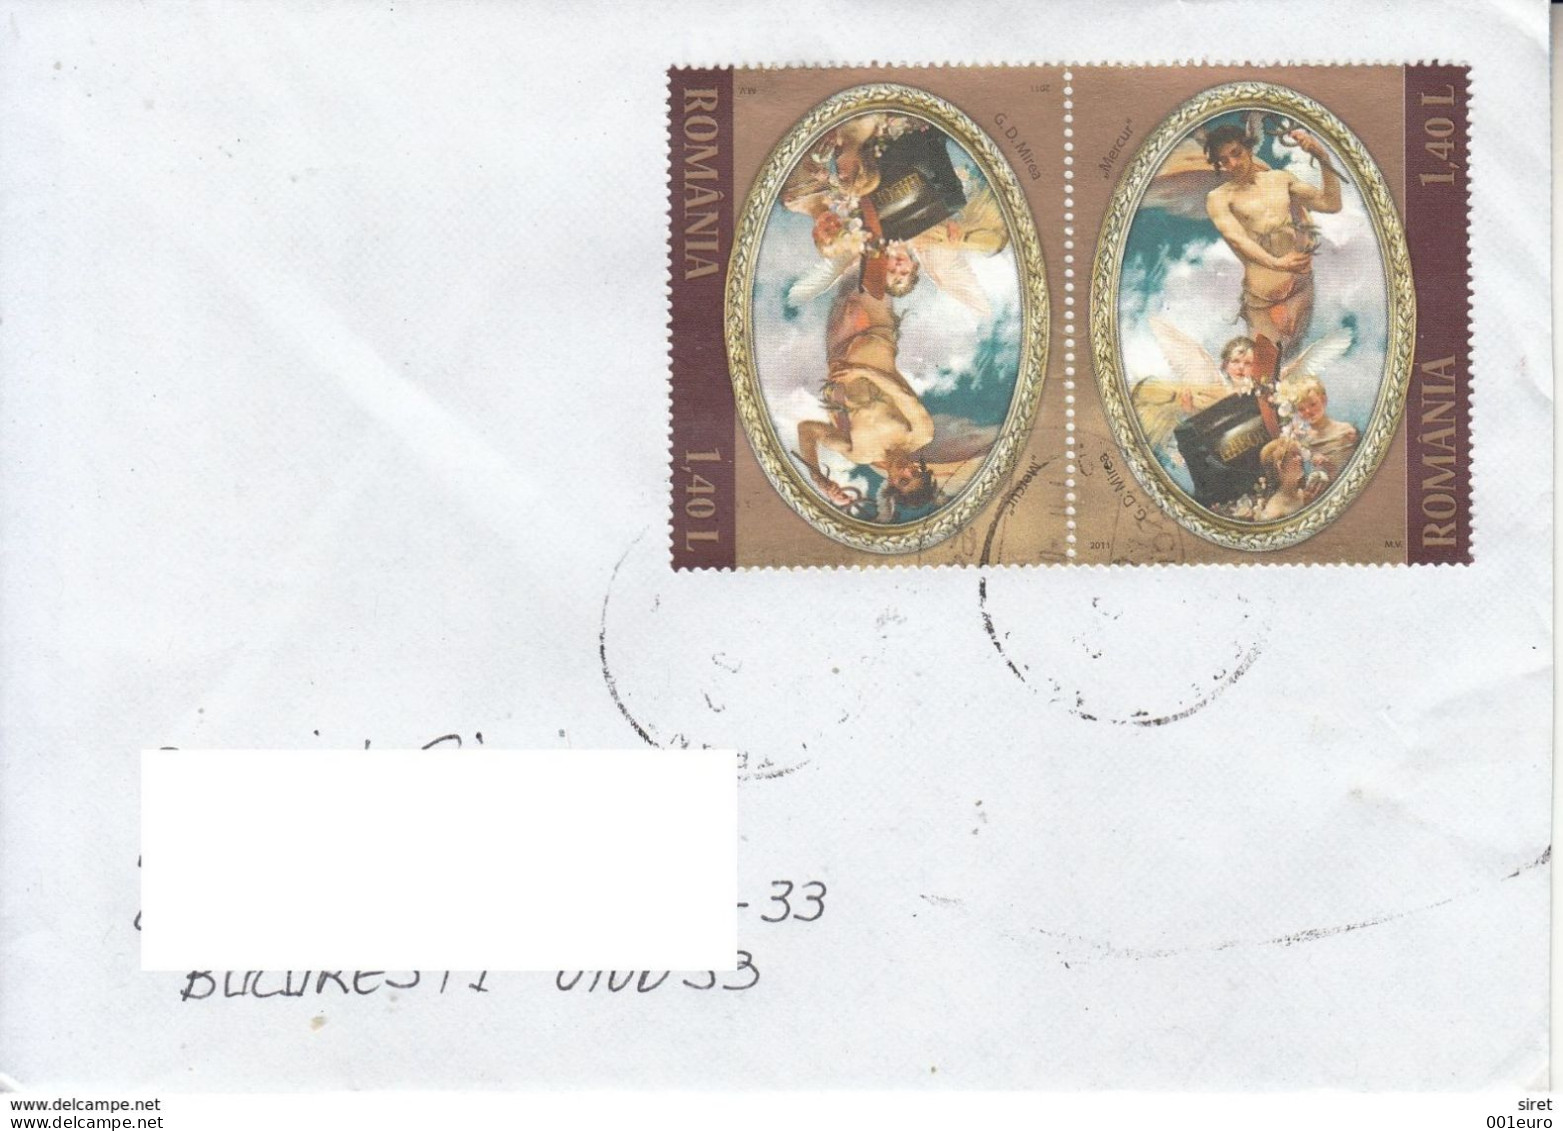 ROMANIA : PAINTING 2 Stamp Tete-beche On Cover Circulated As Domestic Letter #1042162468  - Registered Shipping! - Covers & Documents